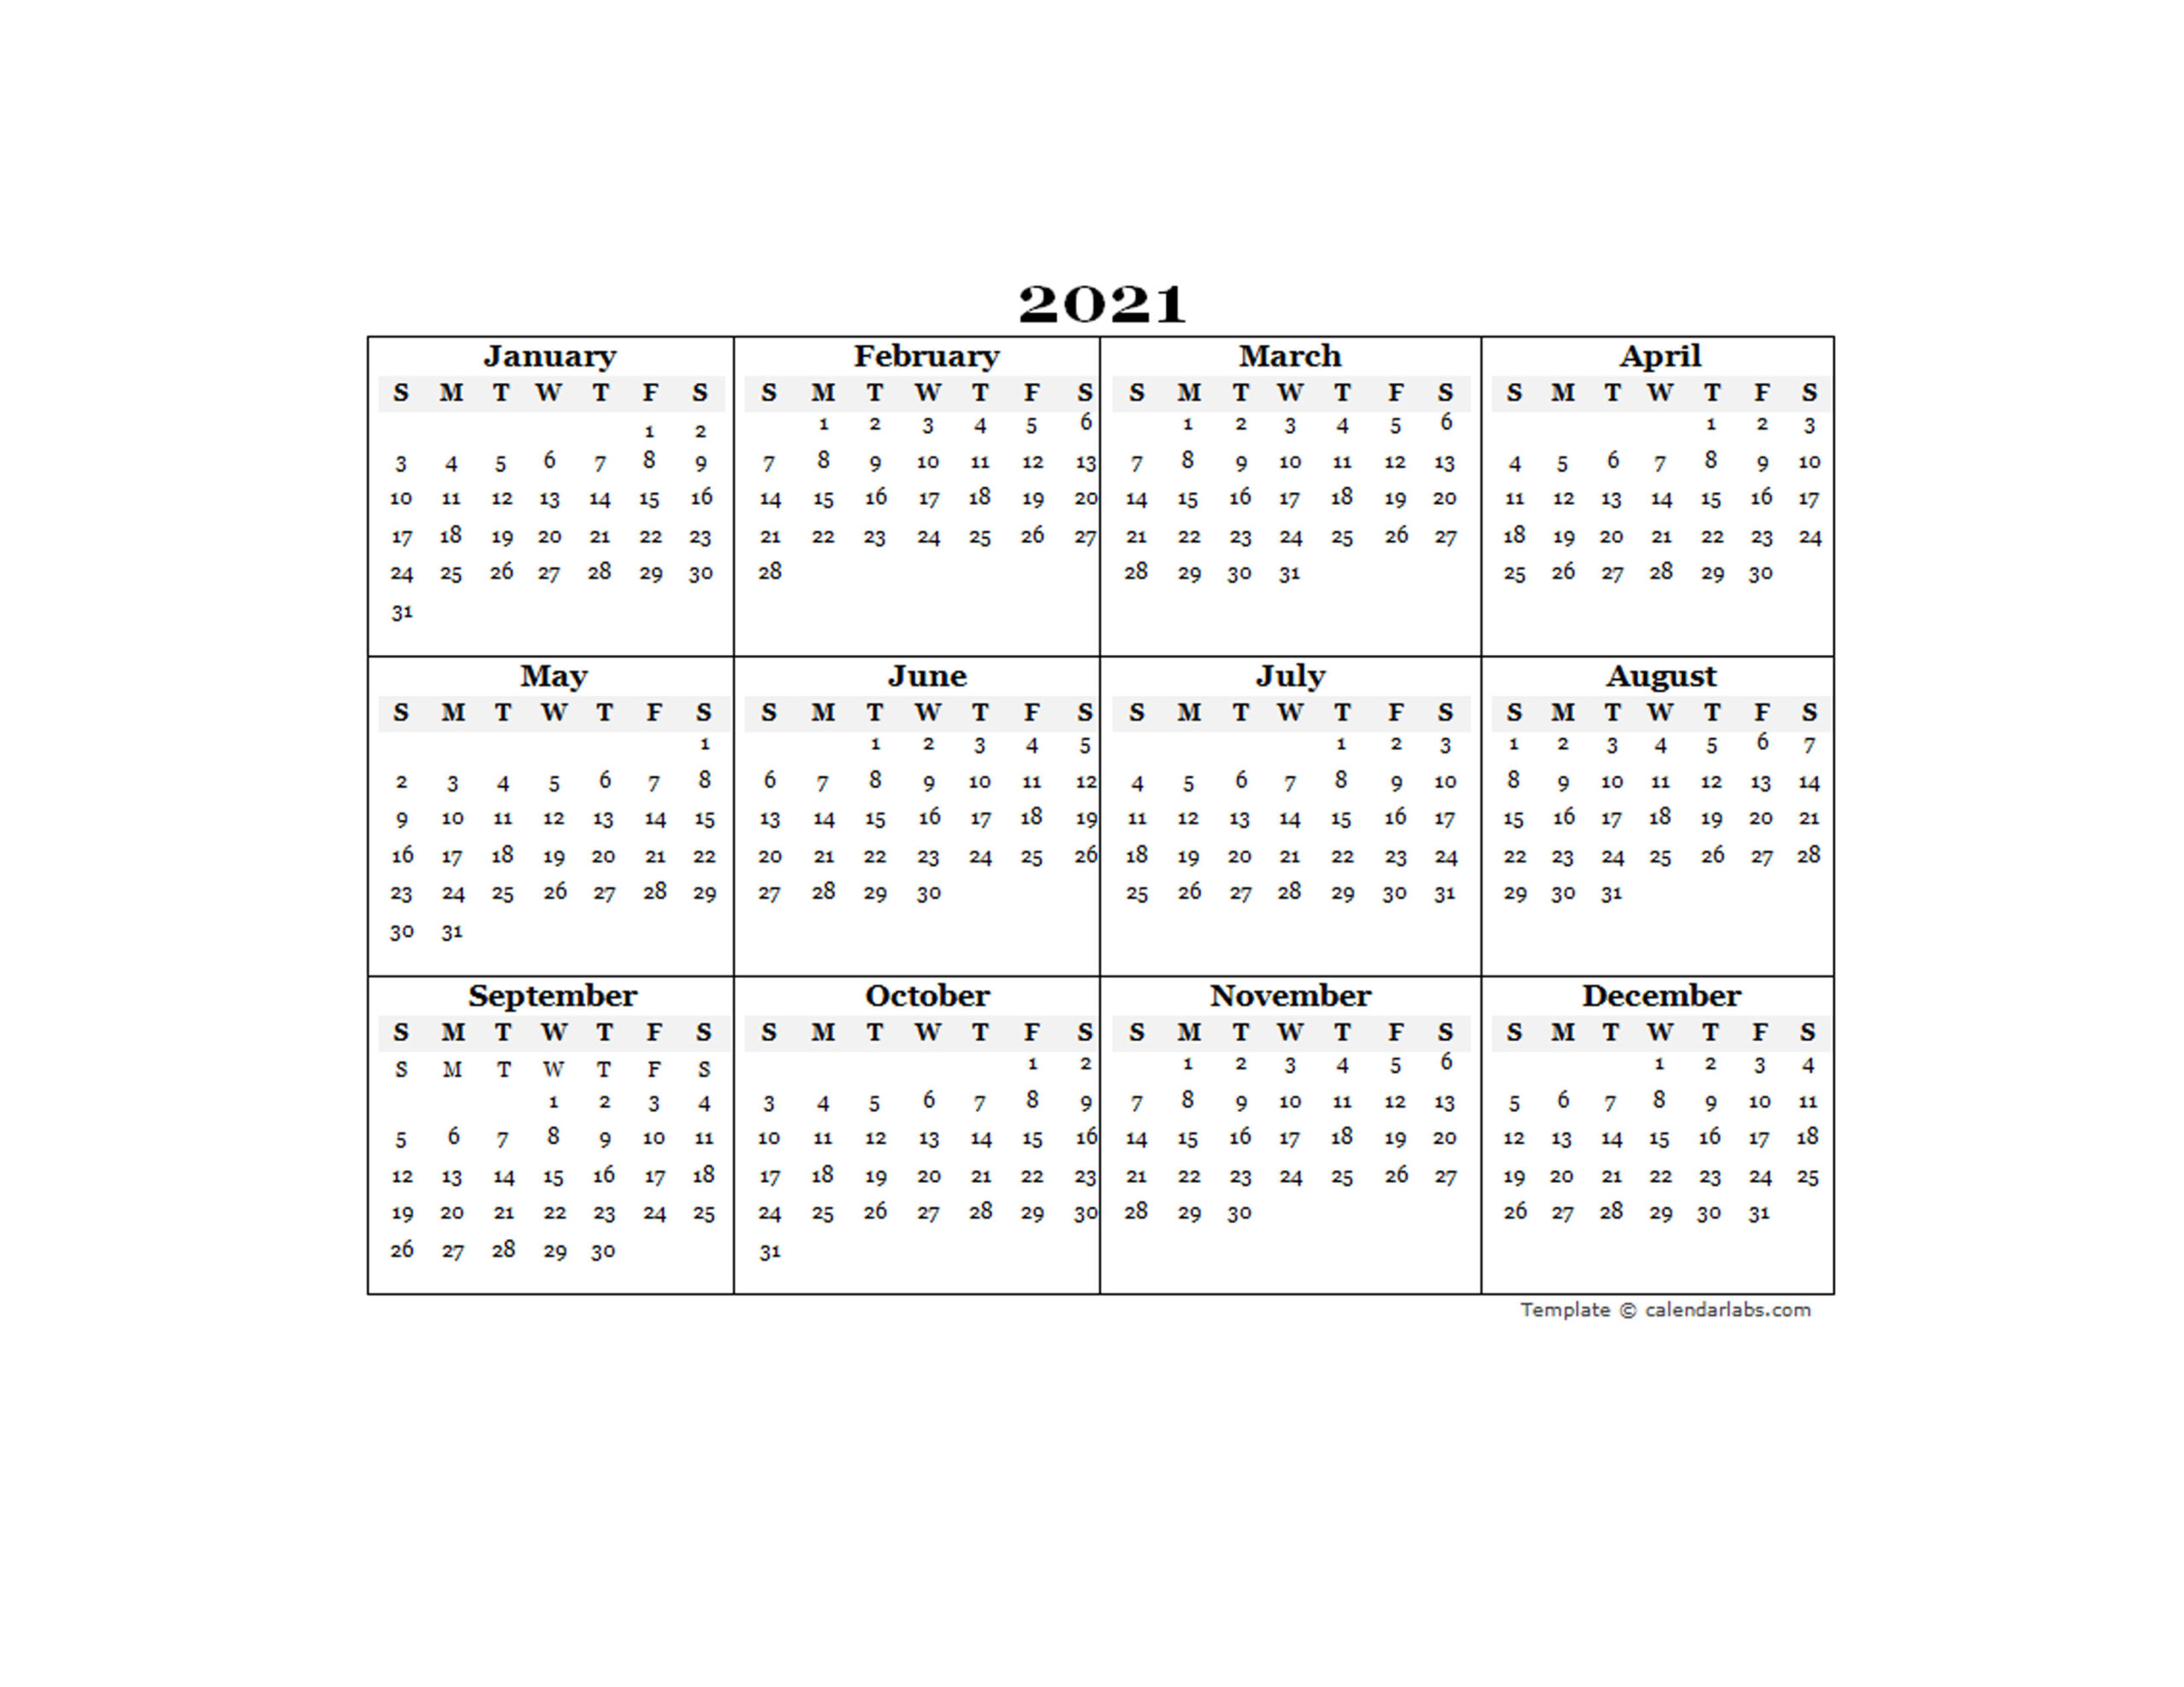 2021 Blank Yearly Calendar Template - Free Printable Templates